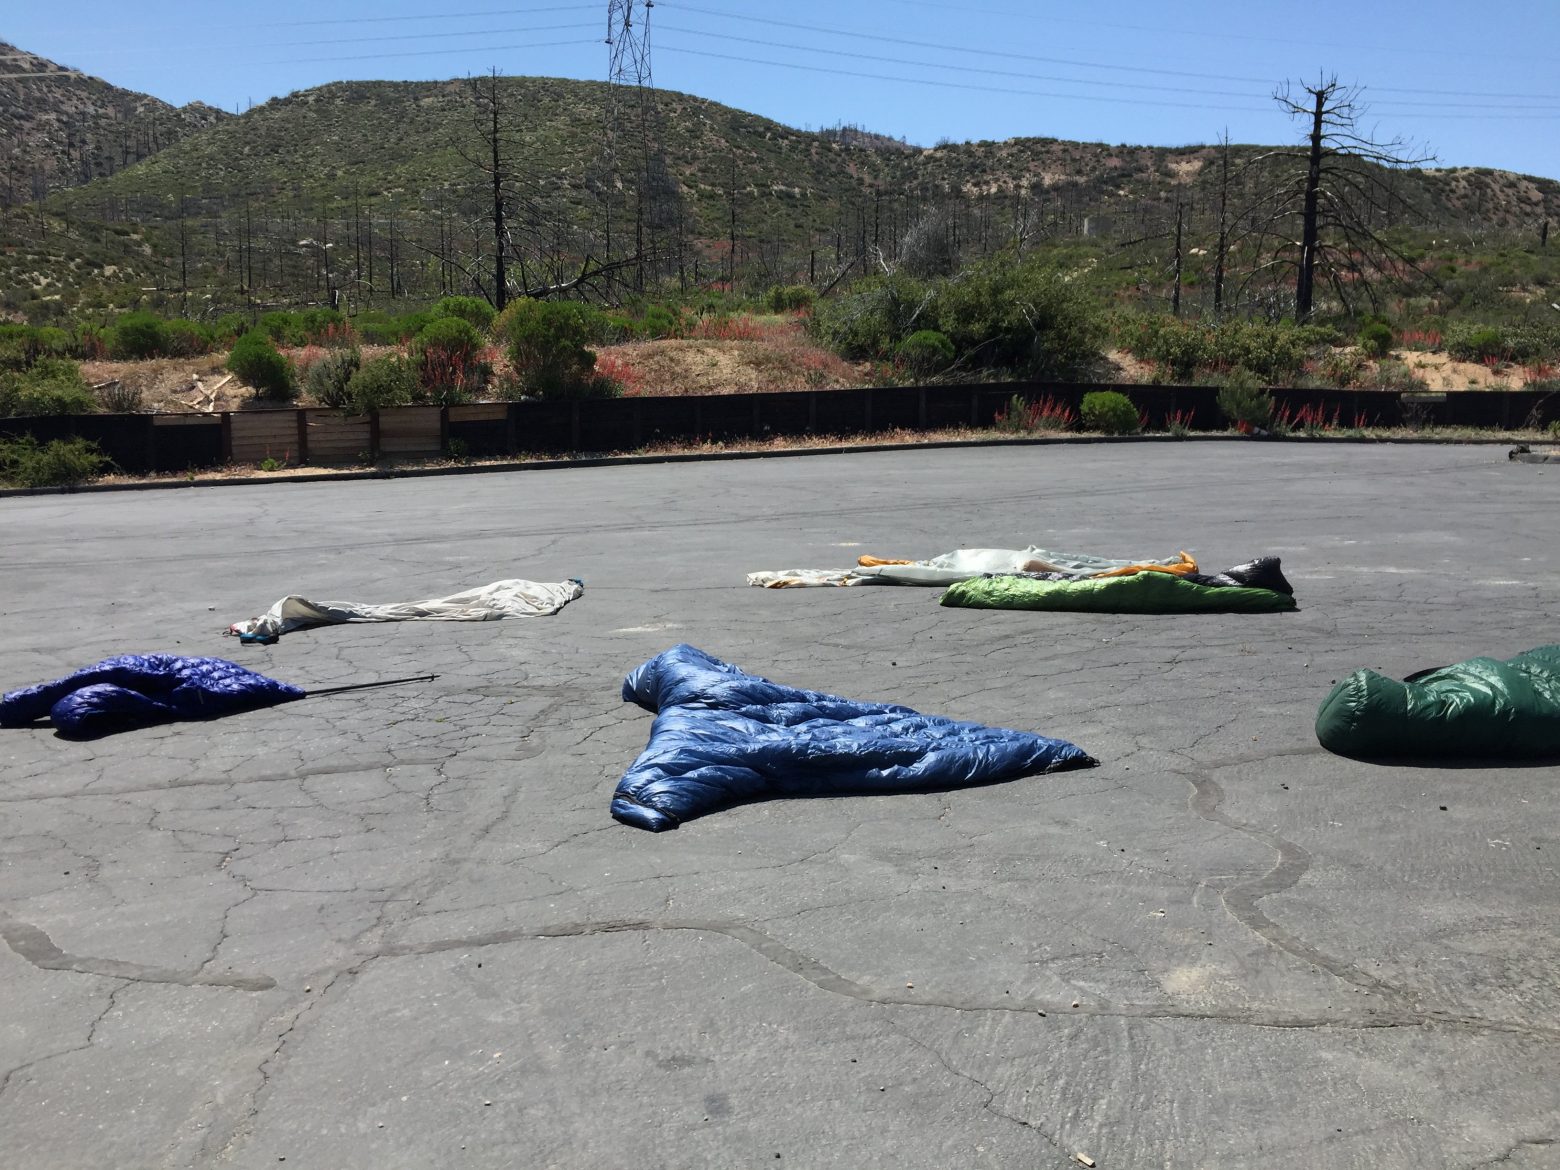 Sleeping bags drying in the sun on pavement